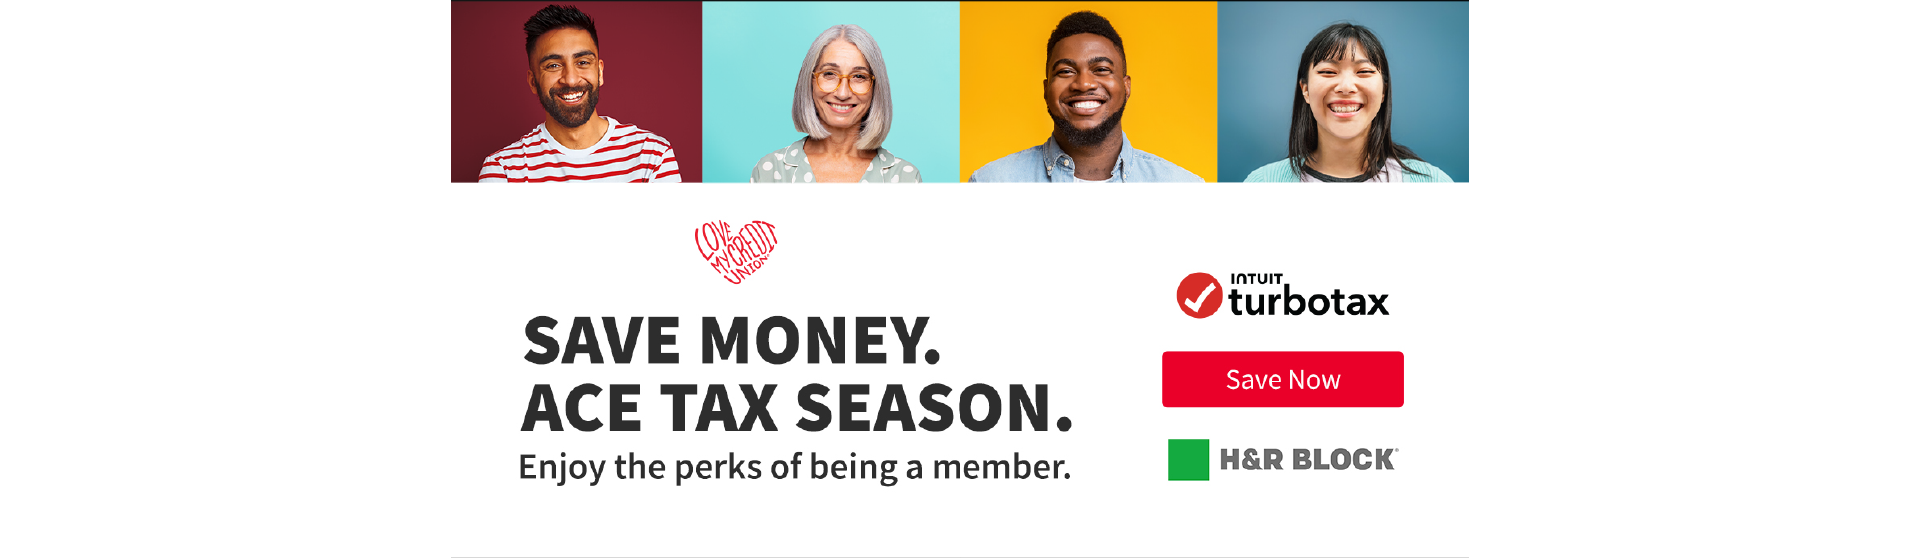 Special savings for our members using TurboTax and H&R Block for tax filing season.